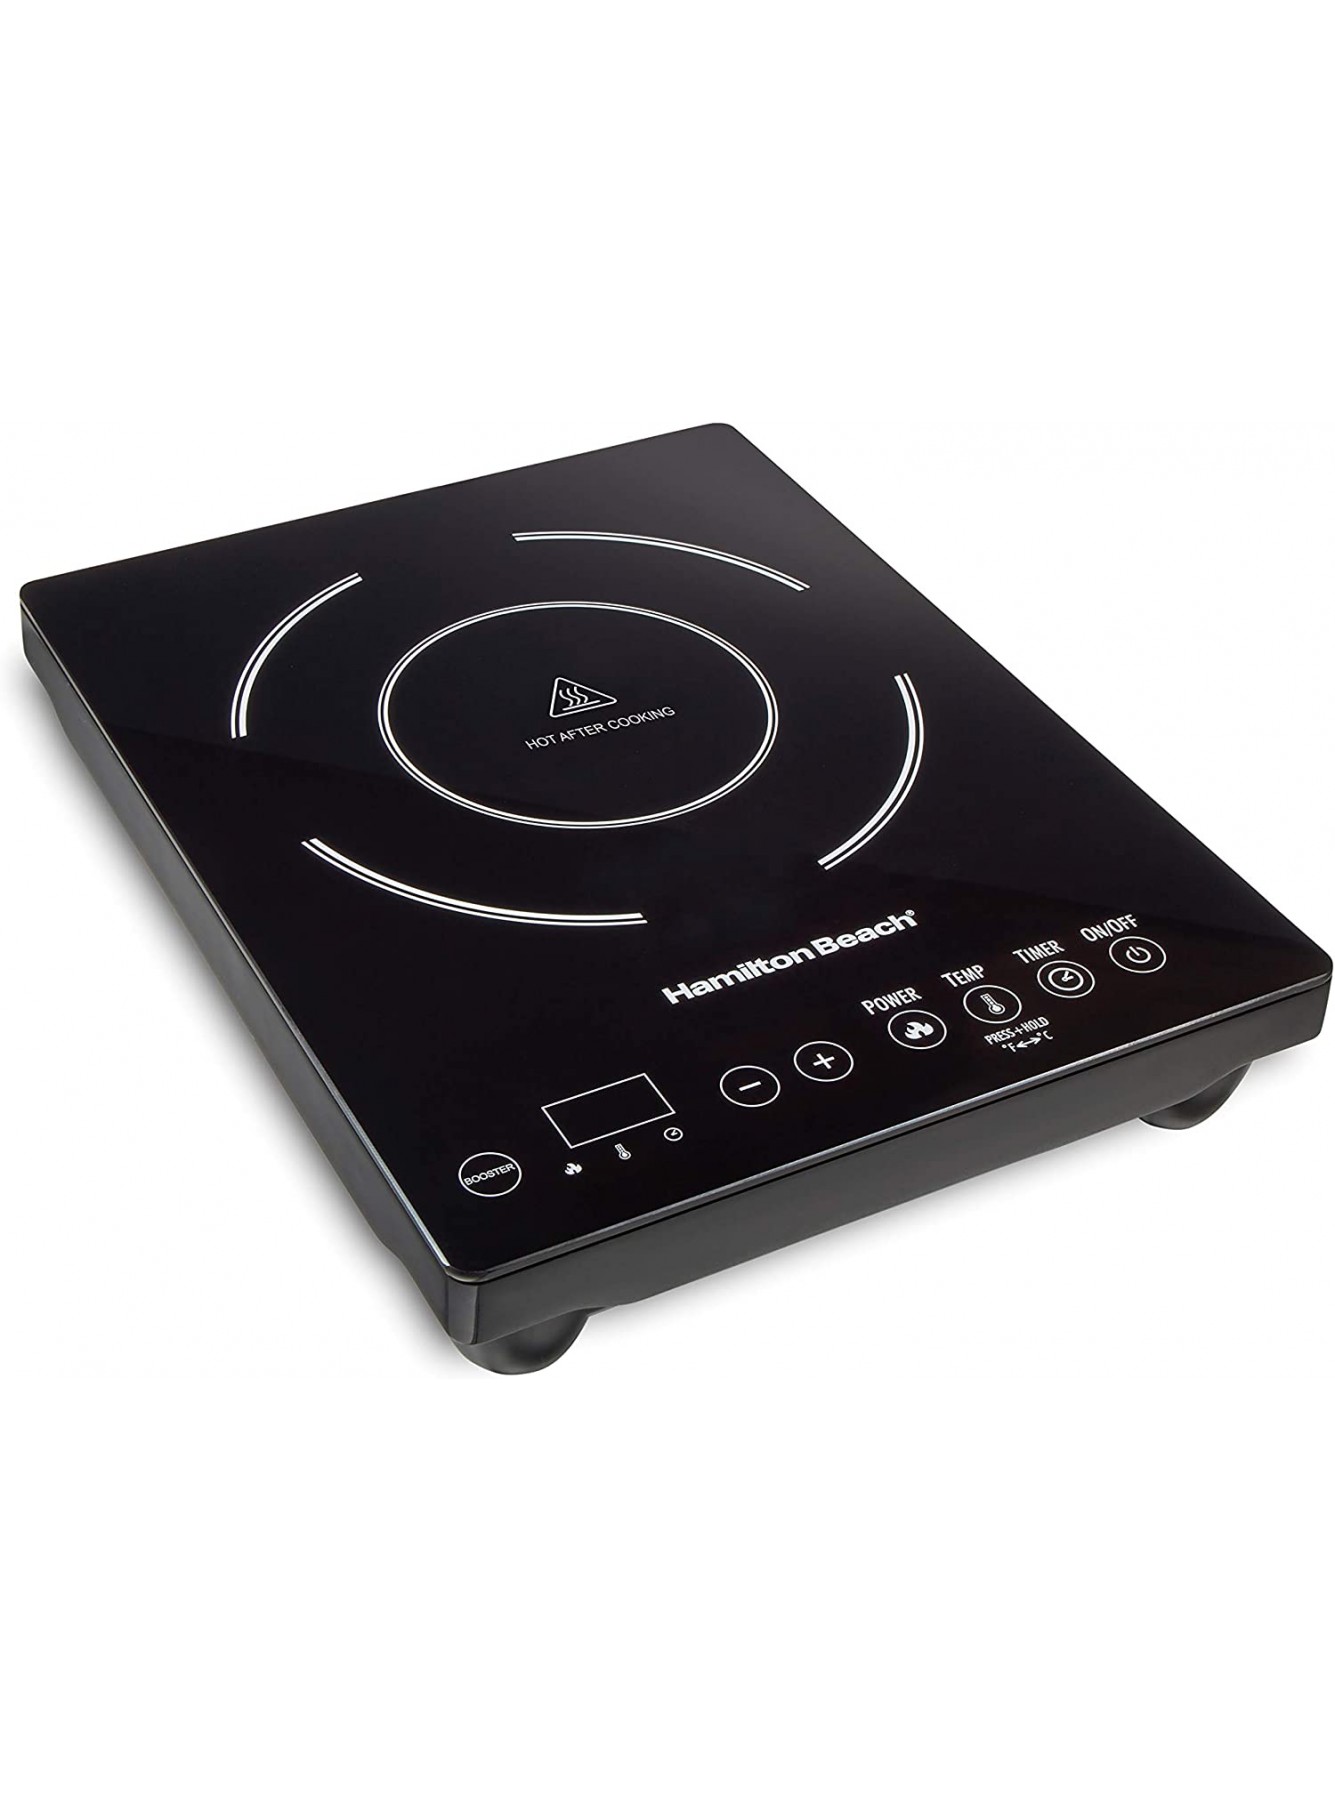 Hamilton Beach Portable Single Induction Cooktop Countertop Burner with Fast Heating Mode 1800 Watts 10 Temperature Settings up to 450F Black 34104 B07S649WVF